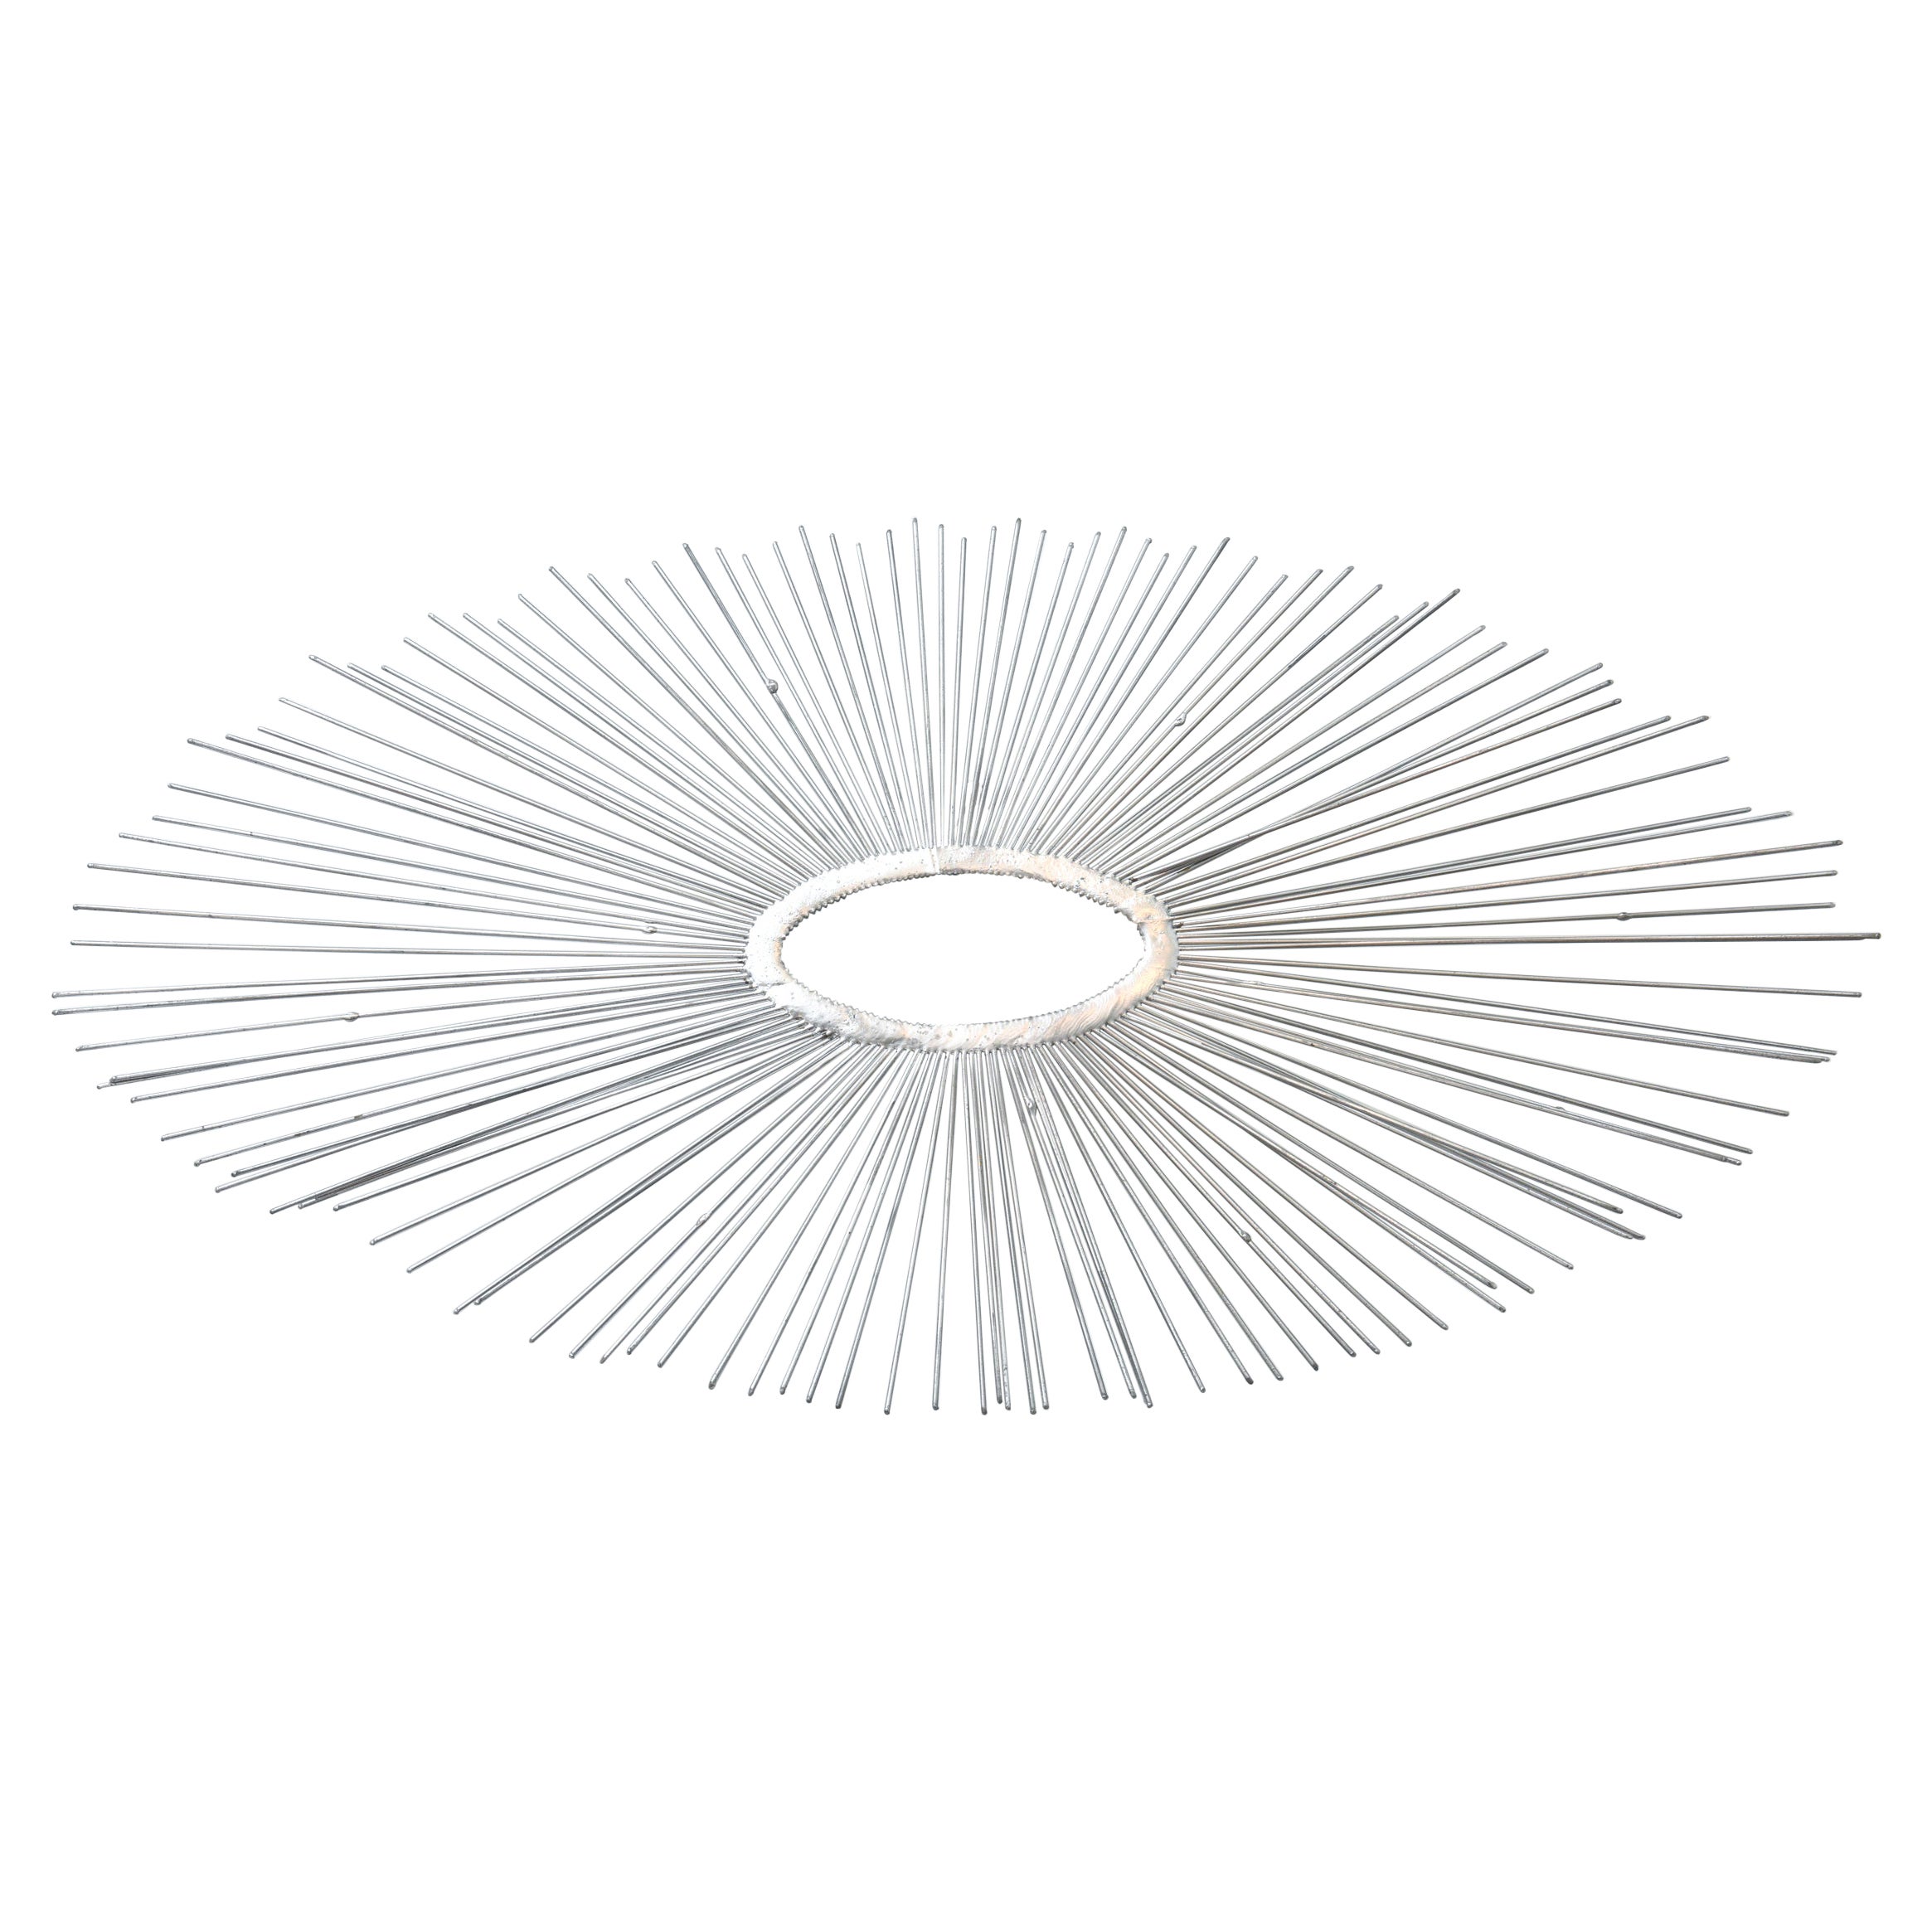 American Modern Wall-Mounted Sunburst Sculpture, Curtis Jere, 1970's For Sale